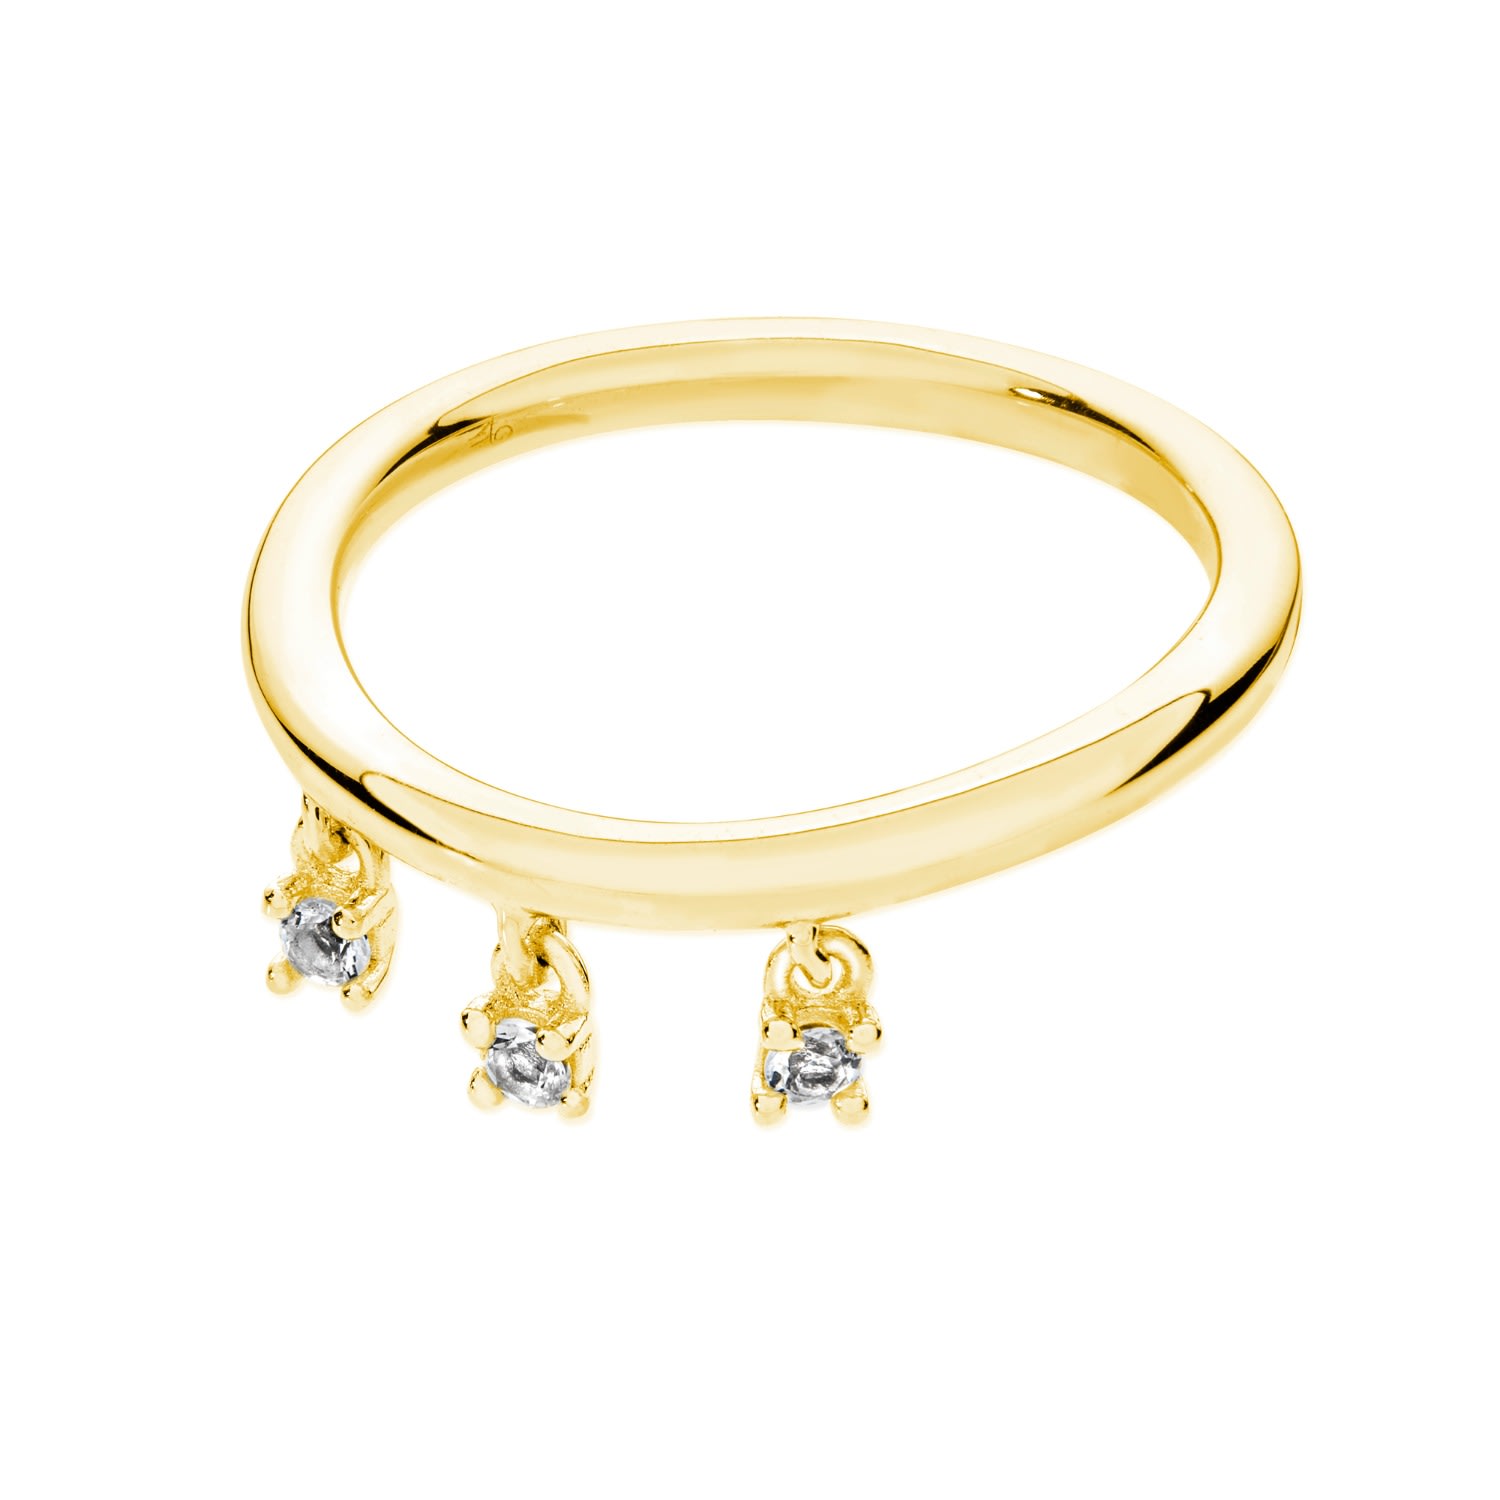 Lucy Quartermaine Women's Tri Skinny Drip Ring With White Topaz In Gold Vermeil